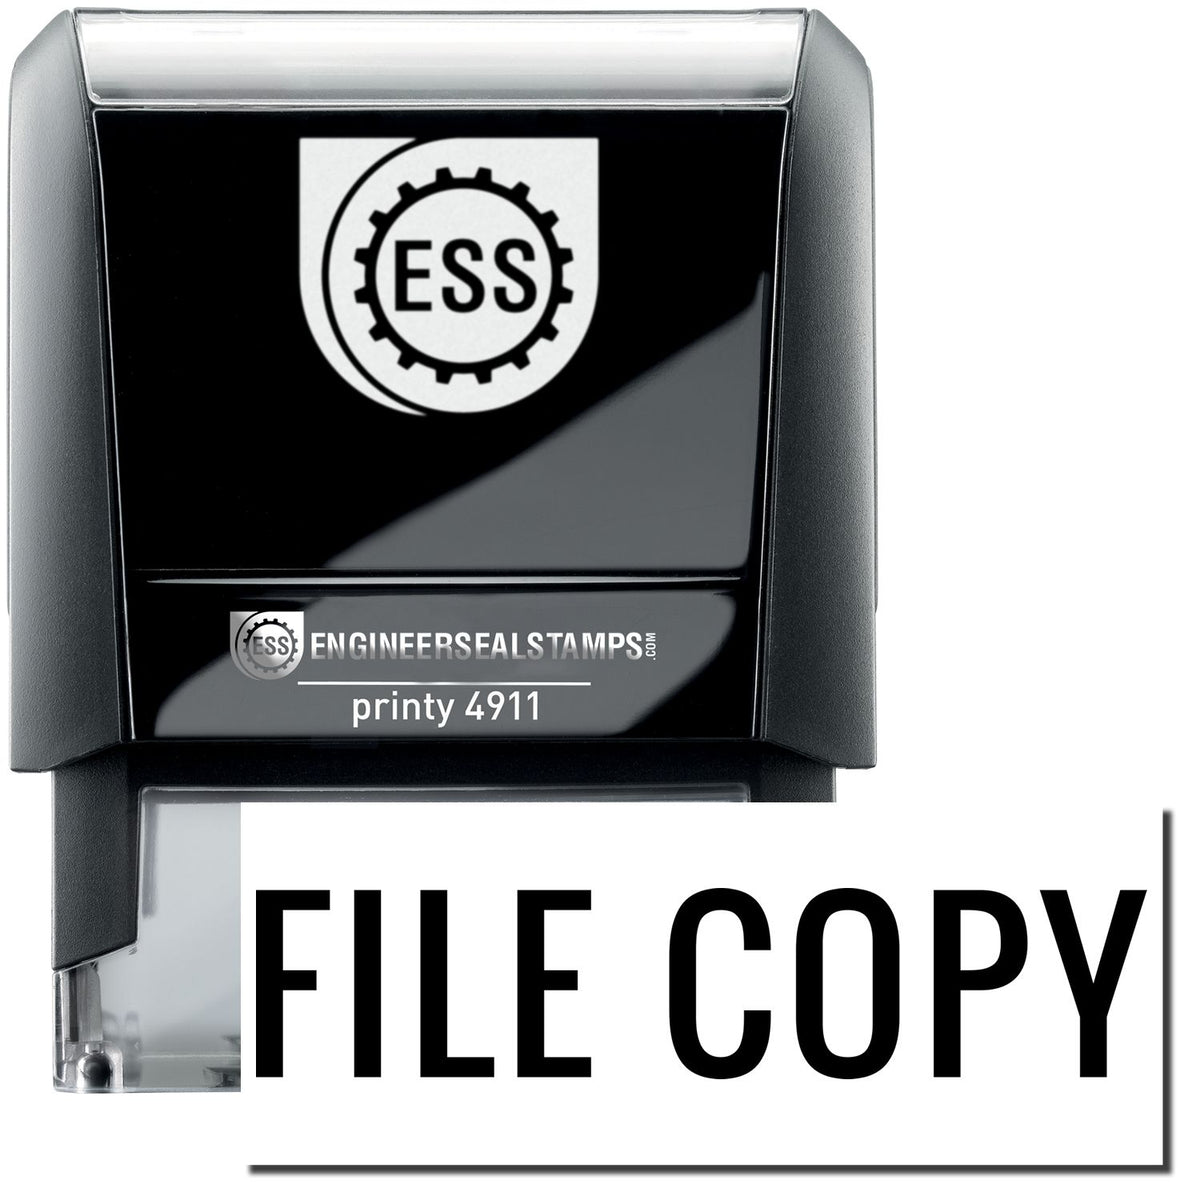 A self-inking stamp with a stamped image showing how the text &quot;FILE COPY&quot; in a narrow font is displayed after stamping.